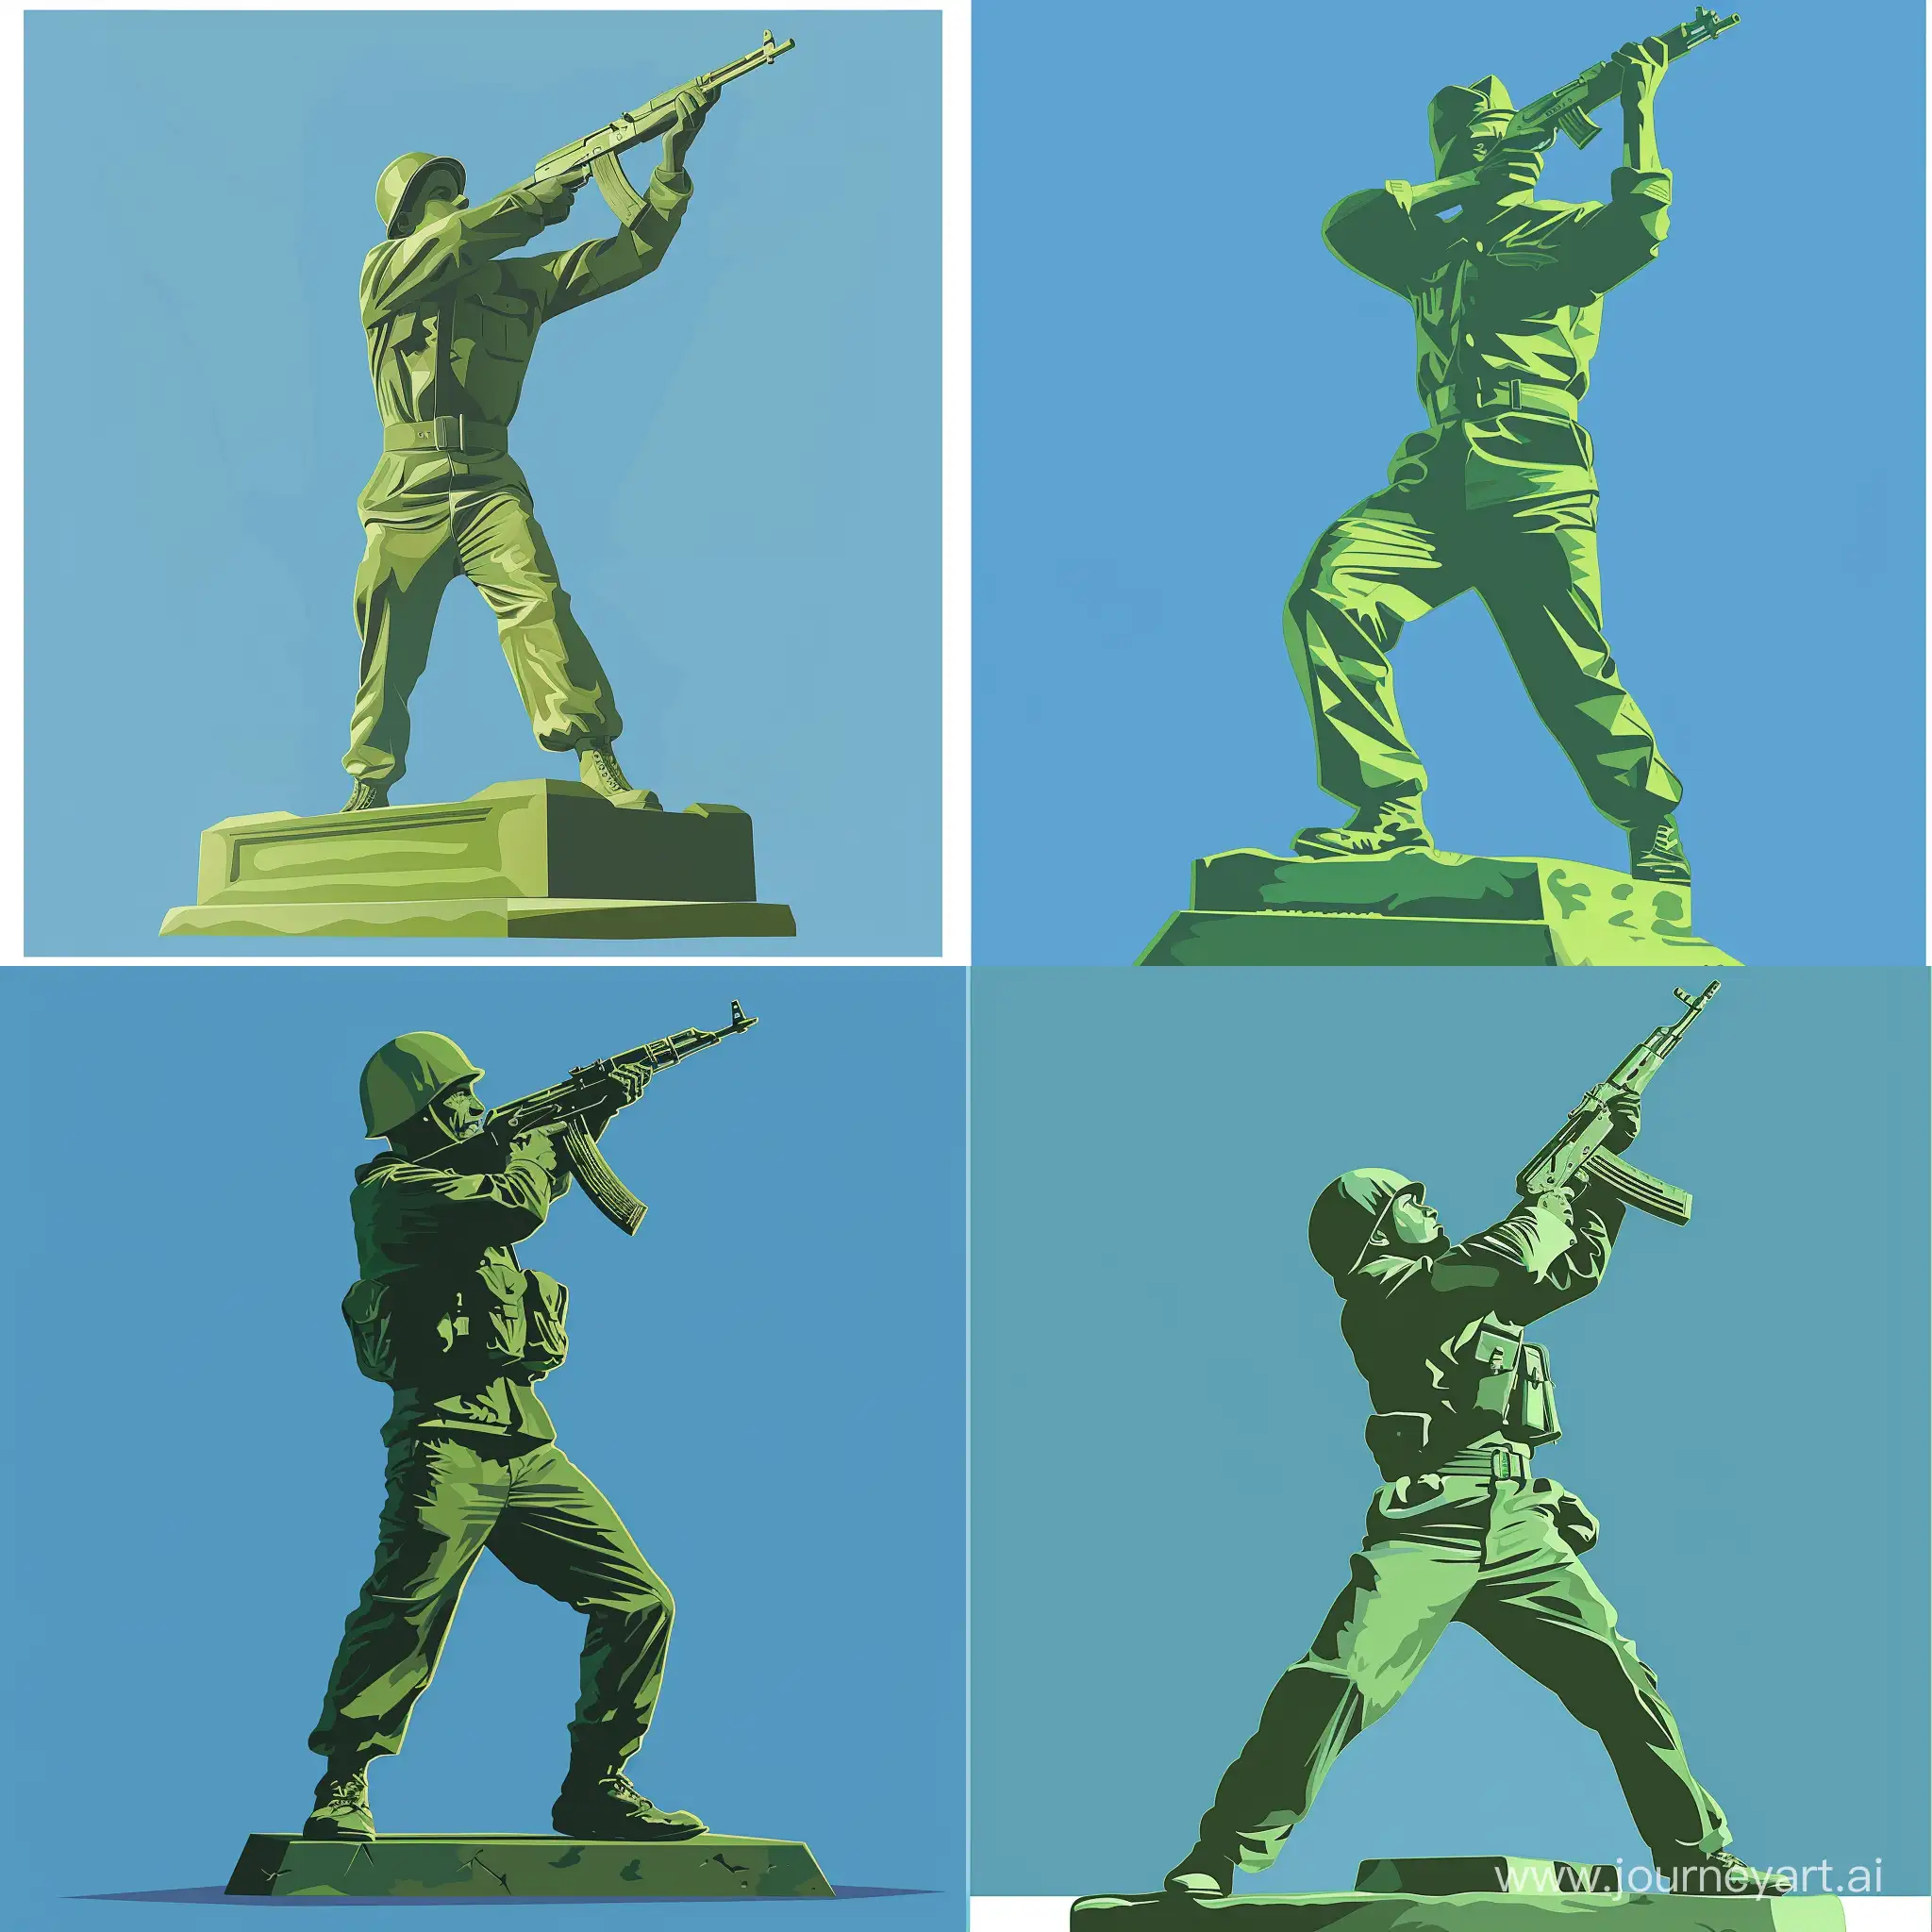 Algerian-Soldier-Statue-of-1954-in-Action-Against-Blue-Sky